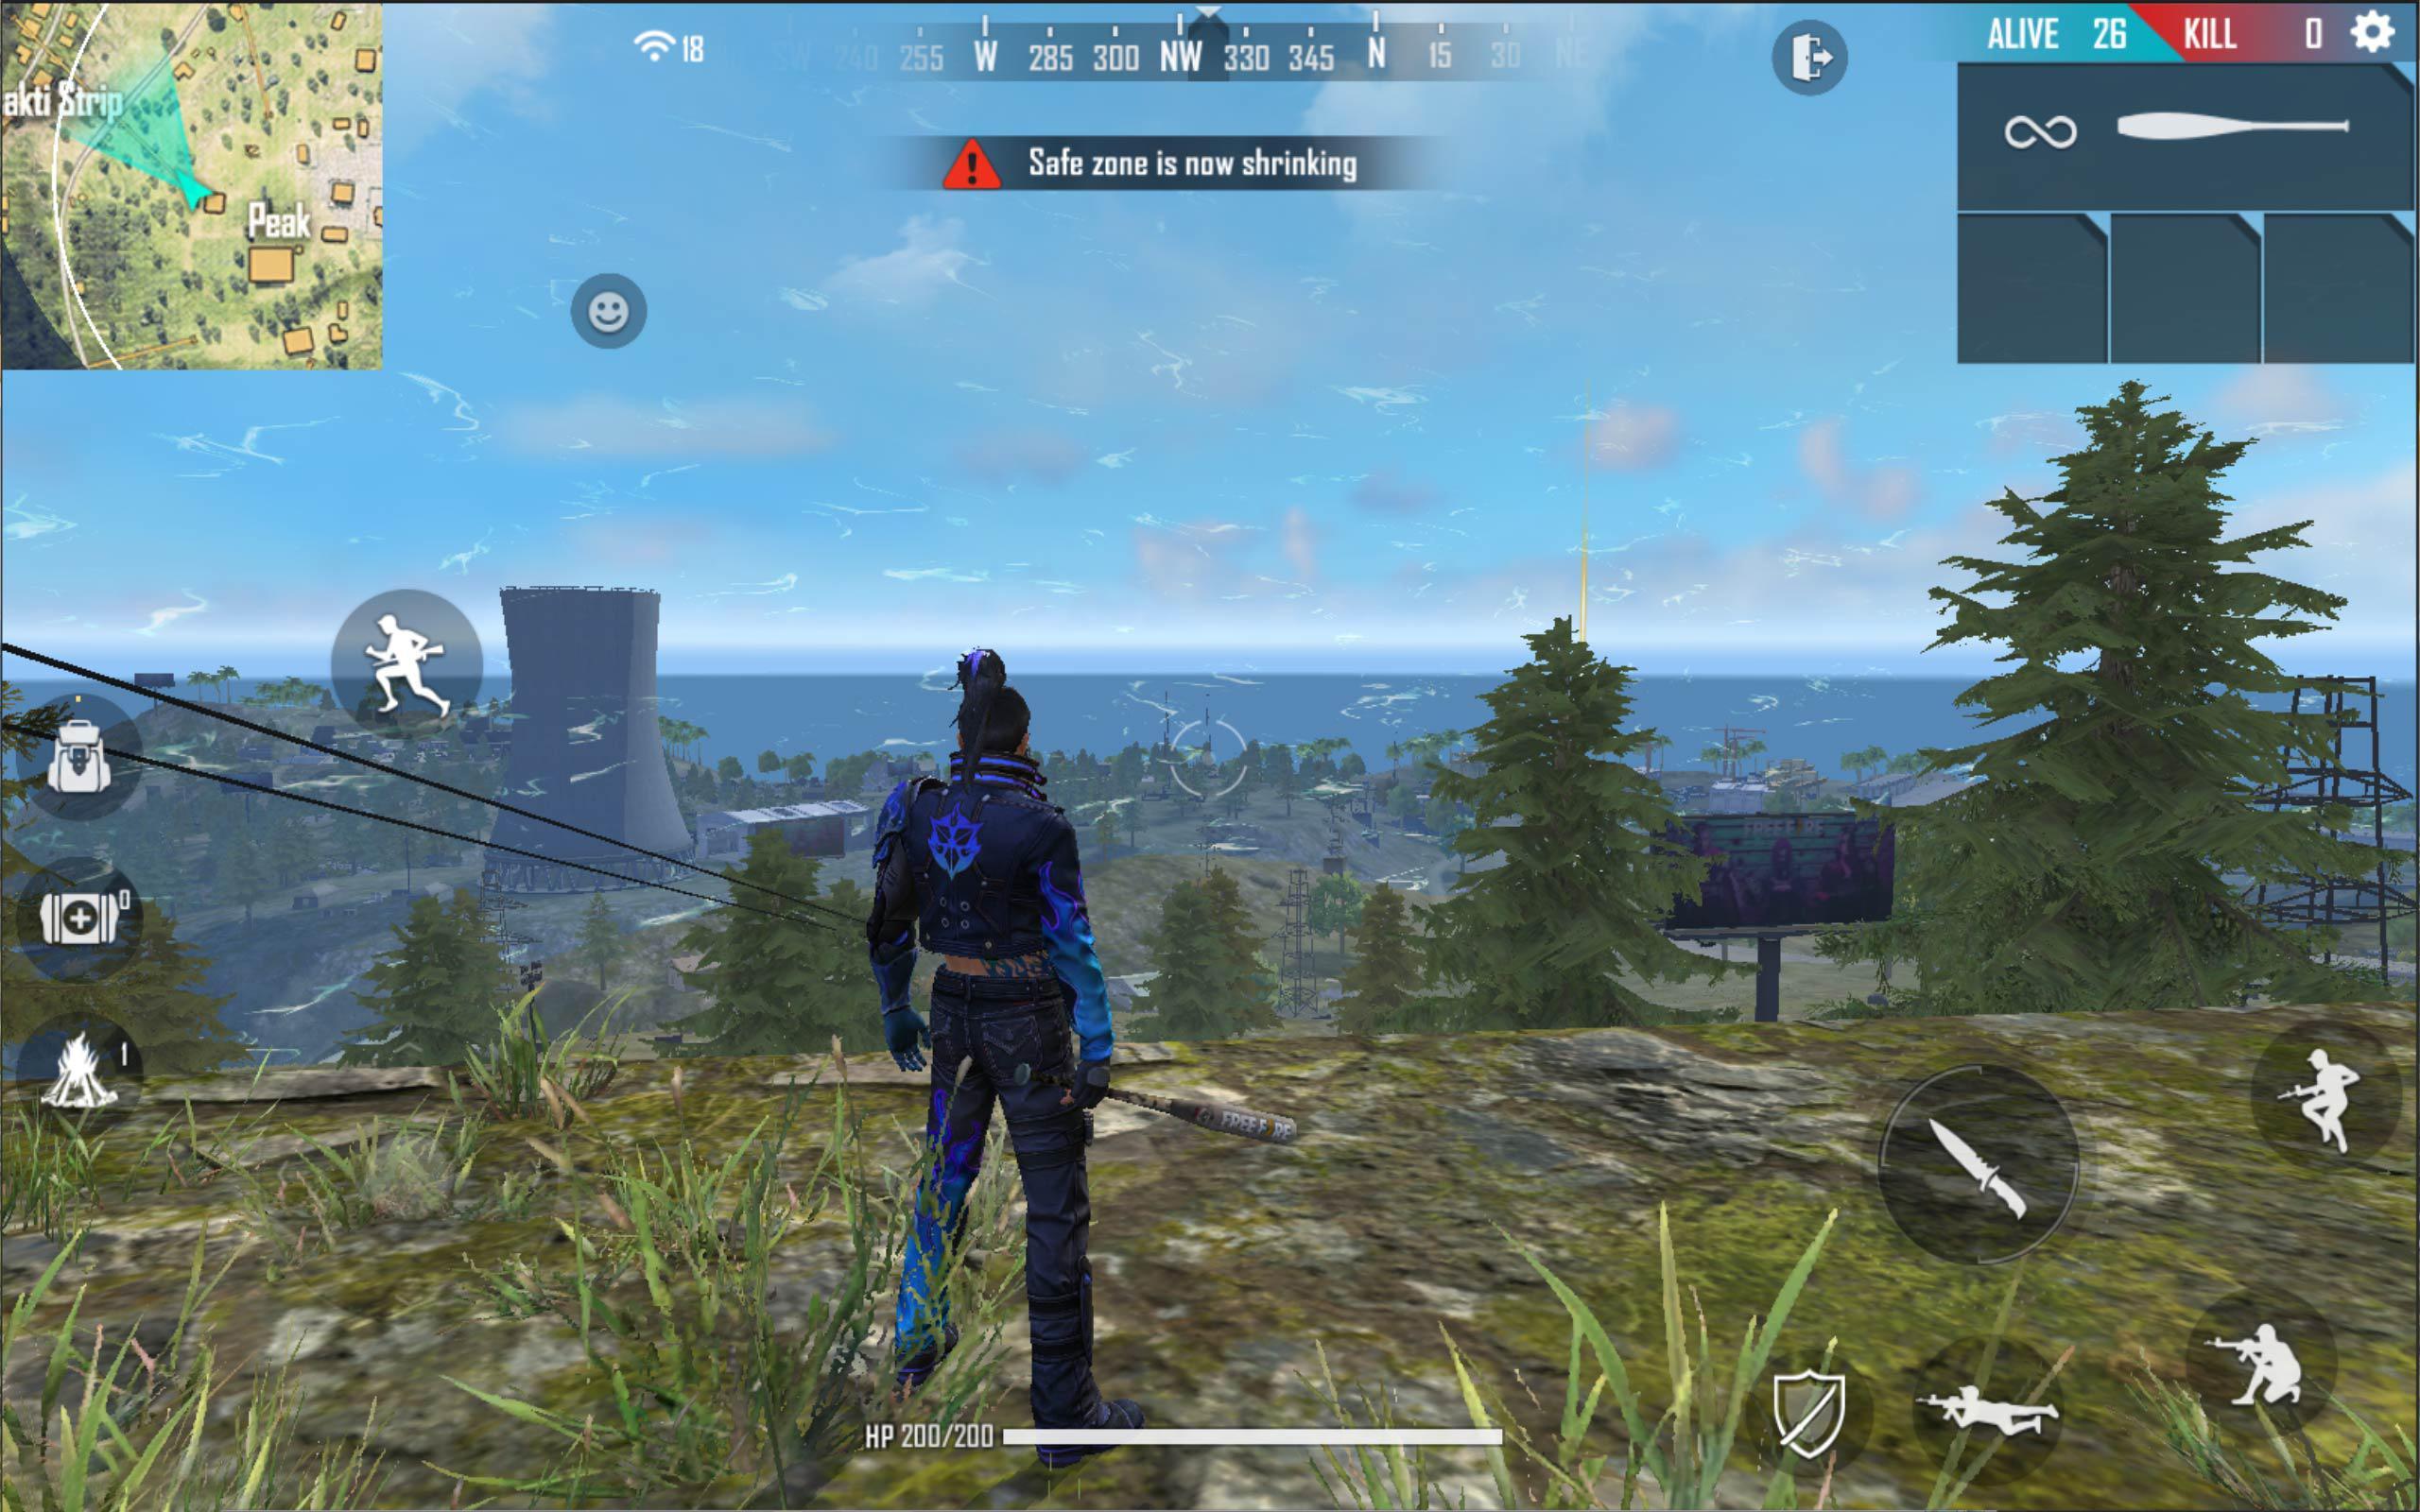 Ff Max 50 Apk Download Garena Free Fire Max 2 56 1 For Android Latest Version 2021 See More Of Love4apk On Facebook